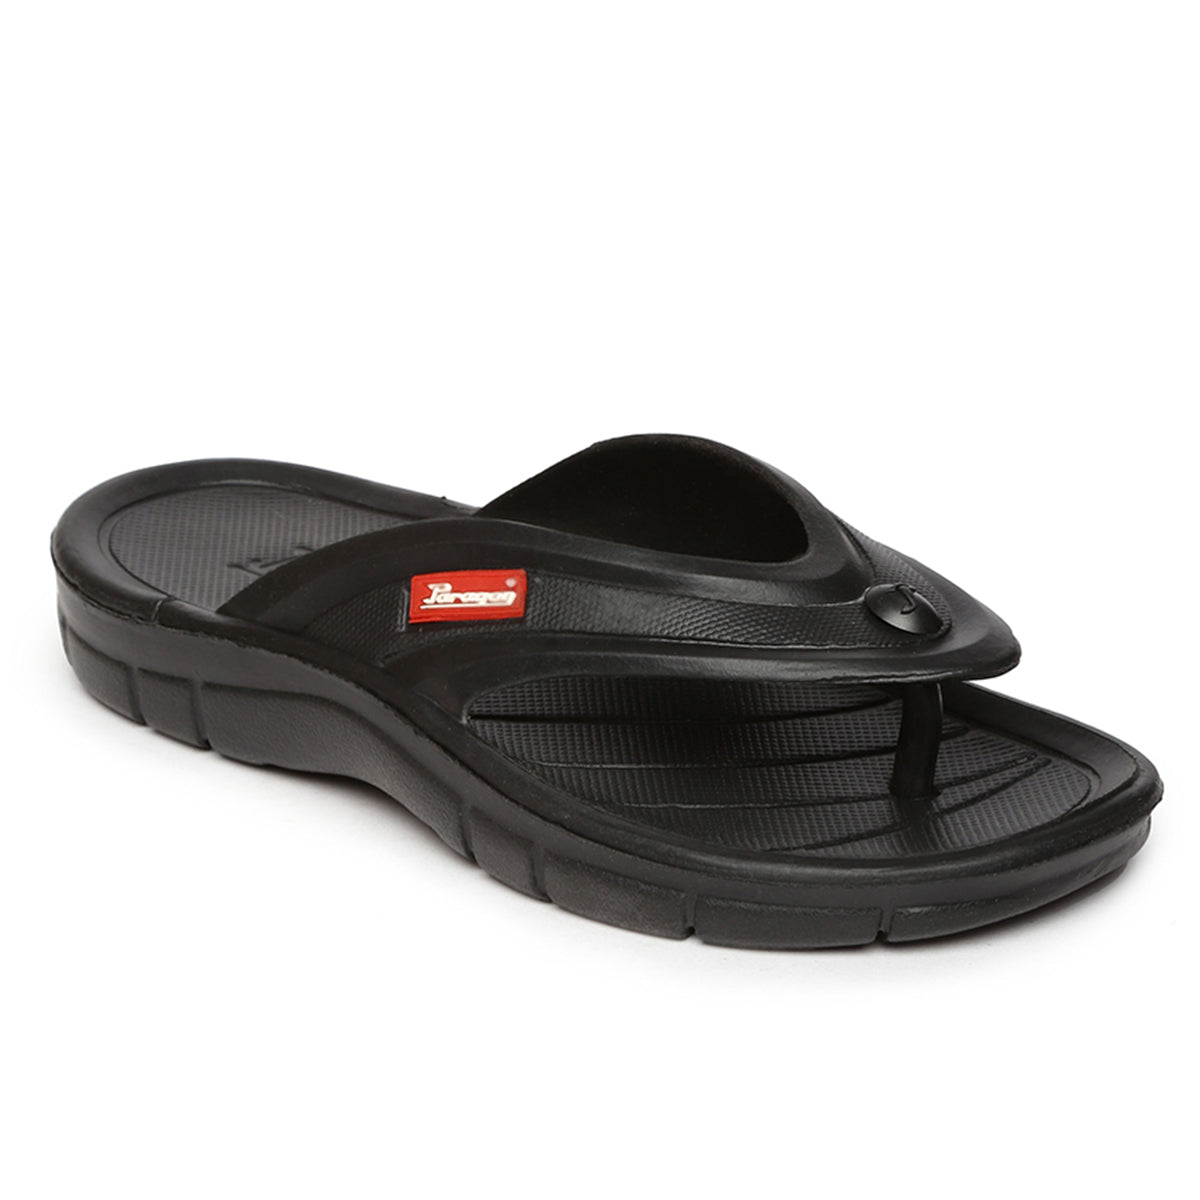 Is Bata chappal better or Paragon? - Quora